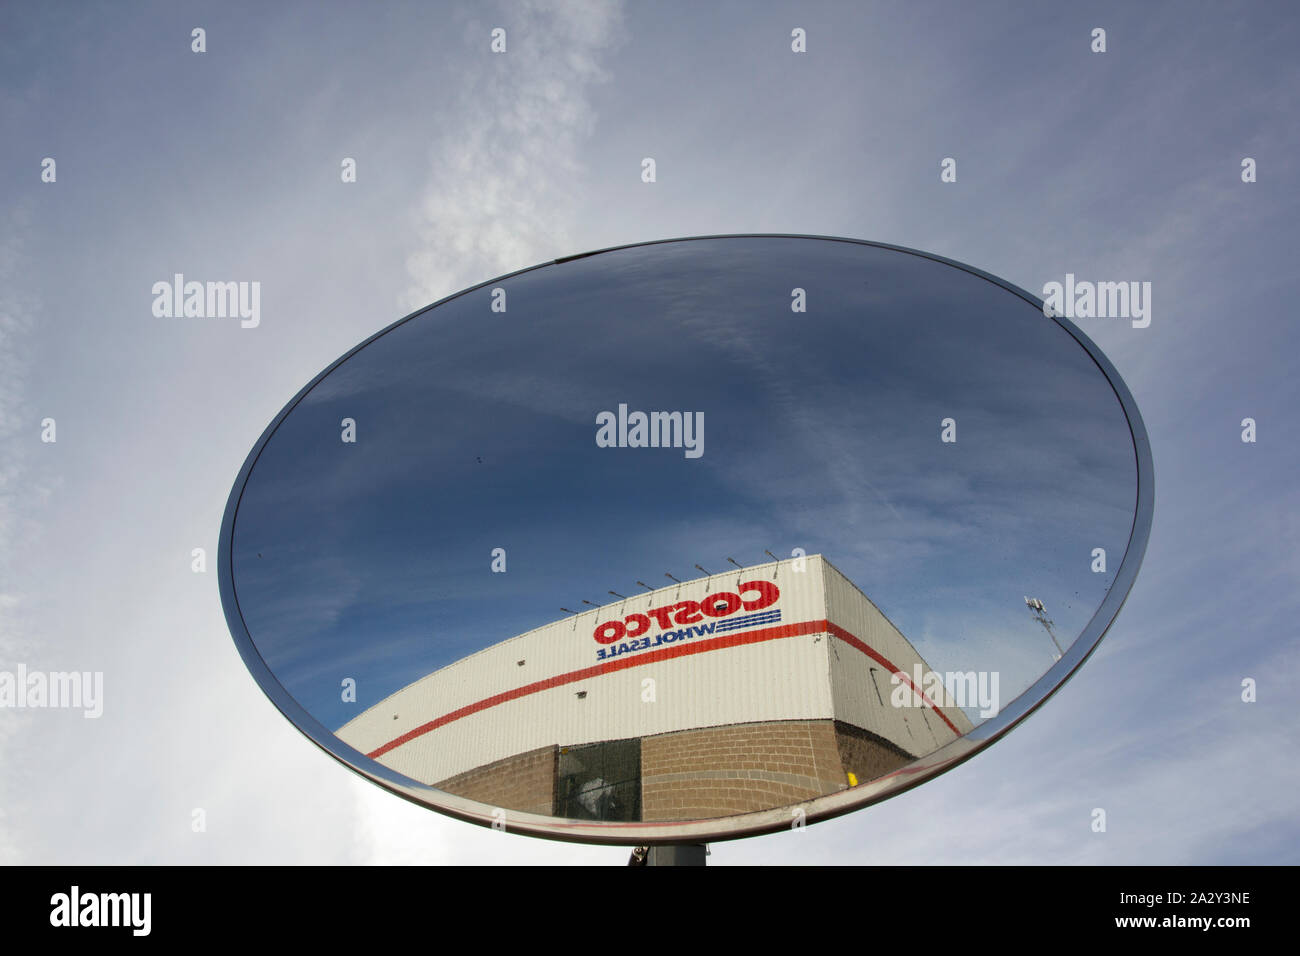 Tigard, Oregon - Mar 15, 2019: The sign of Costco Wholesale seen from a traffic safety mirror at a Costco Wholesale store. Stock Photo